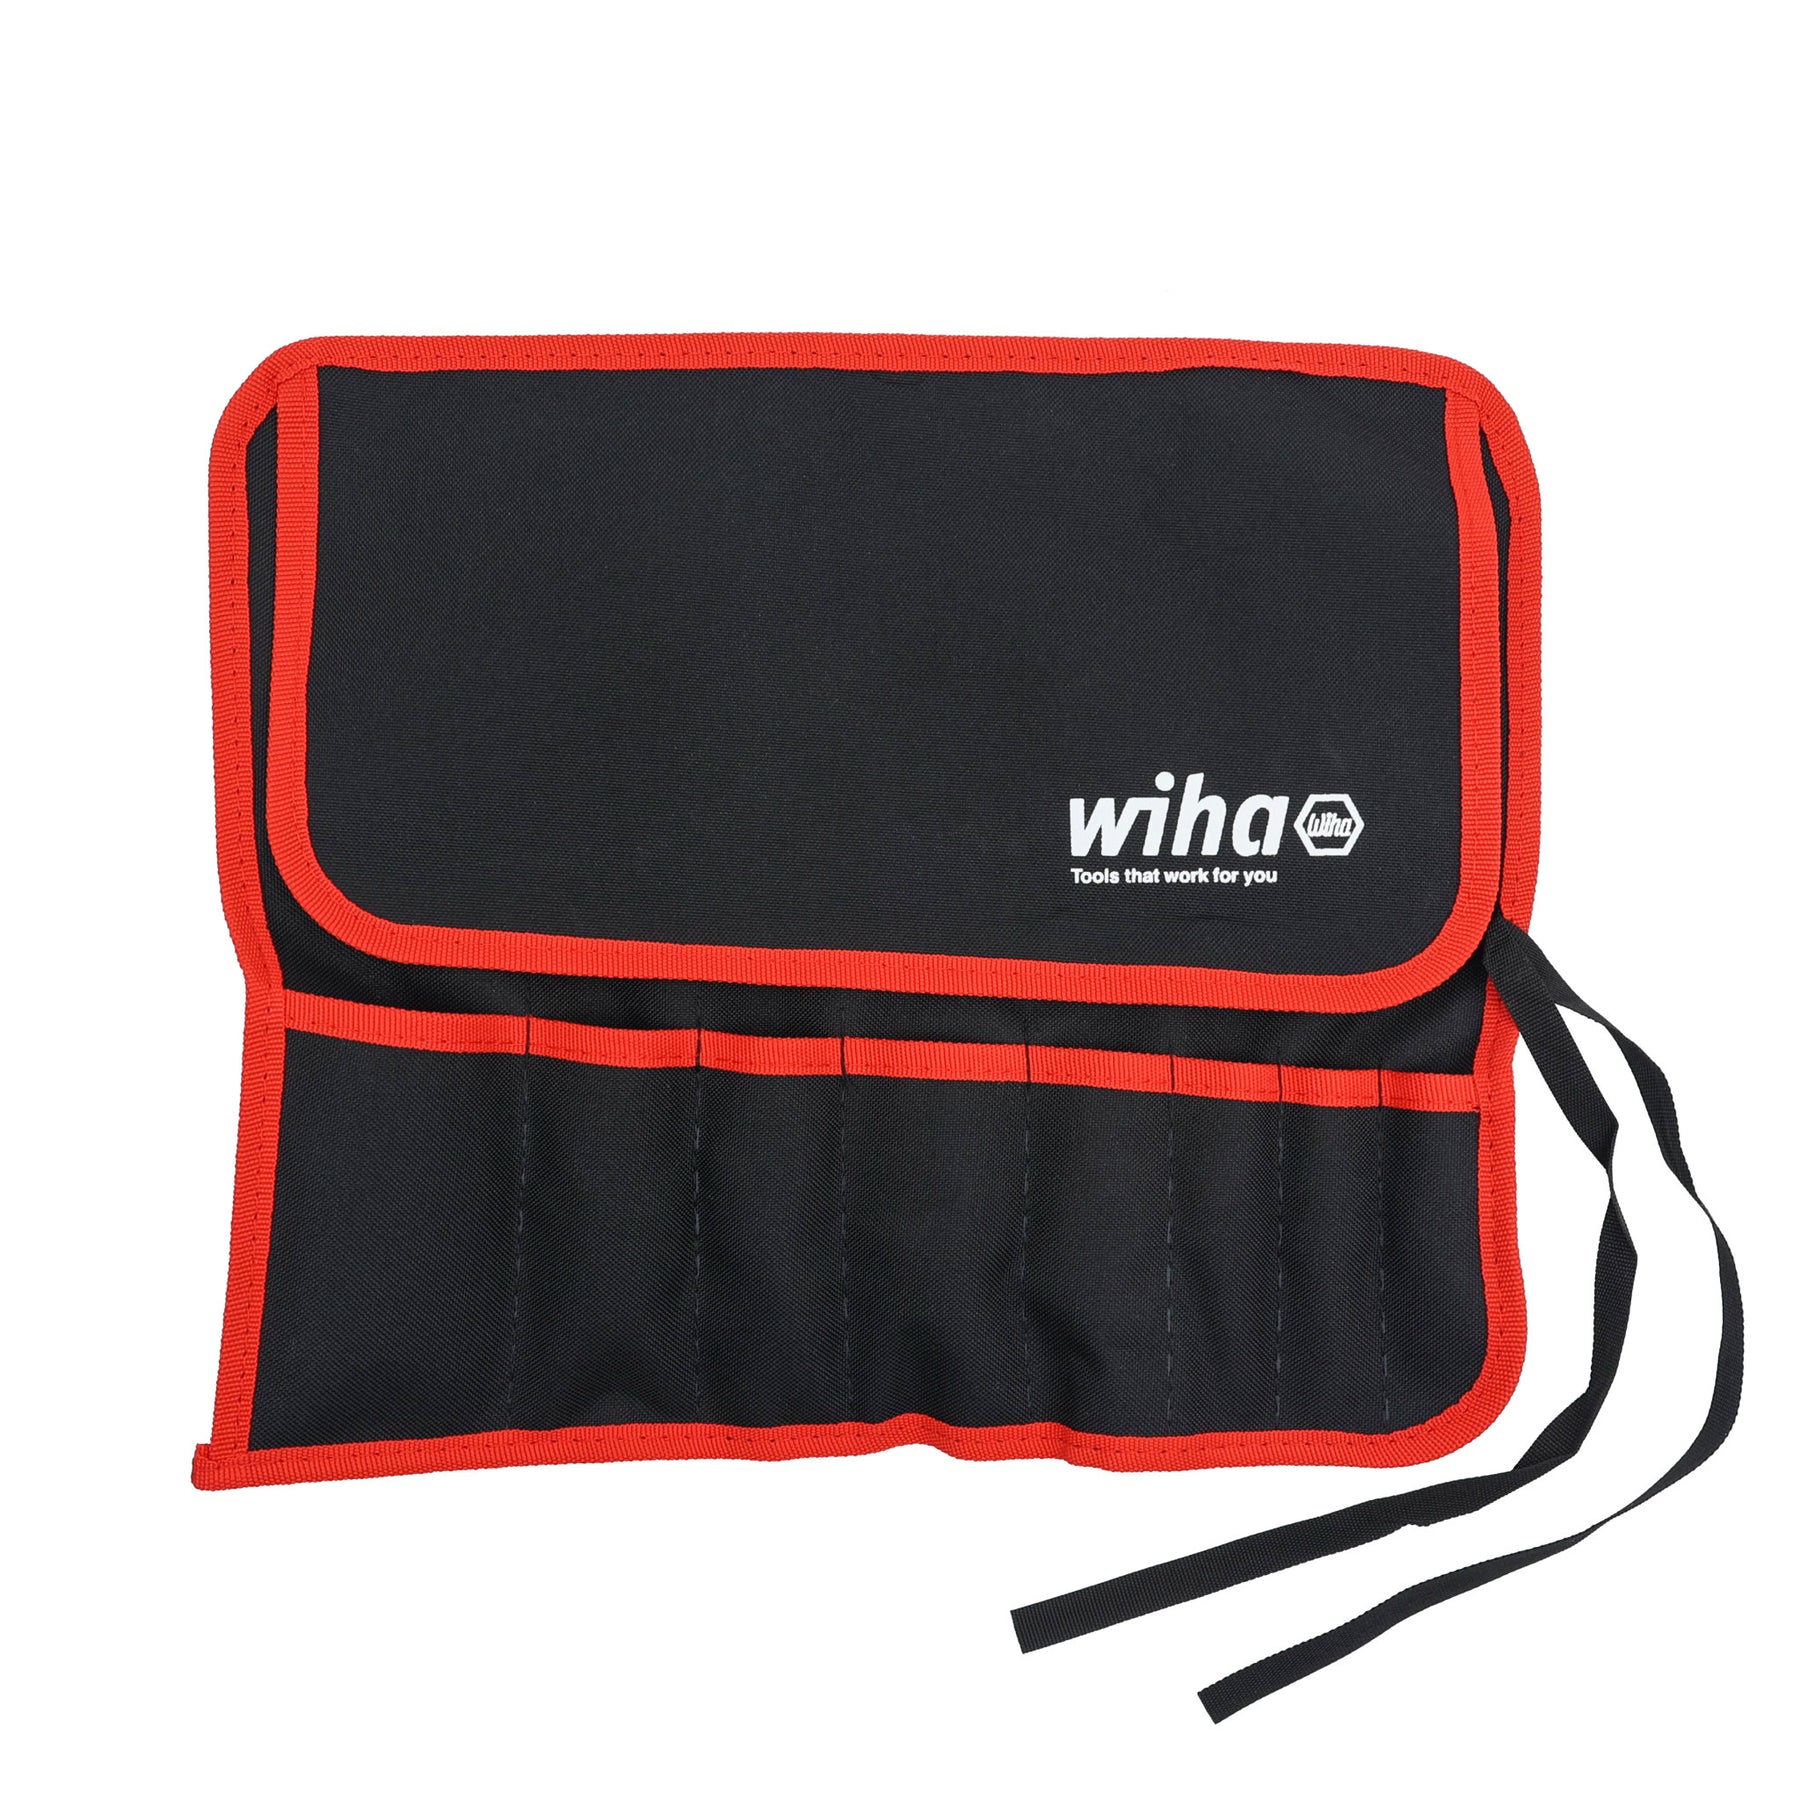 Wiha 91243 Pouch Large RD/BLK for 8 Piece